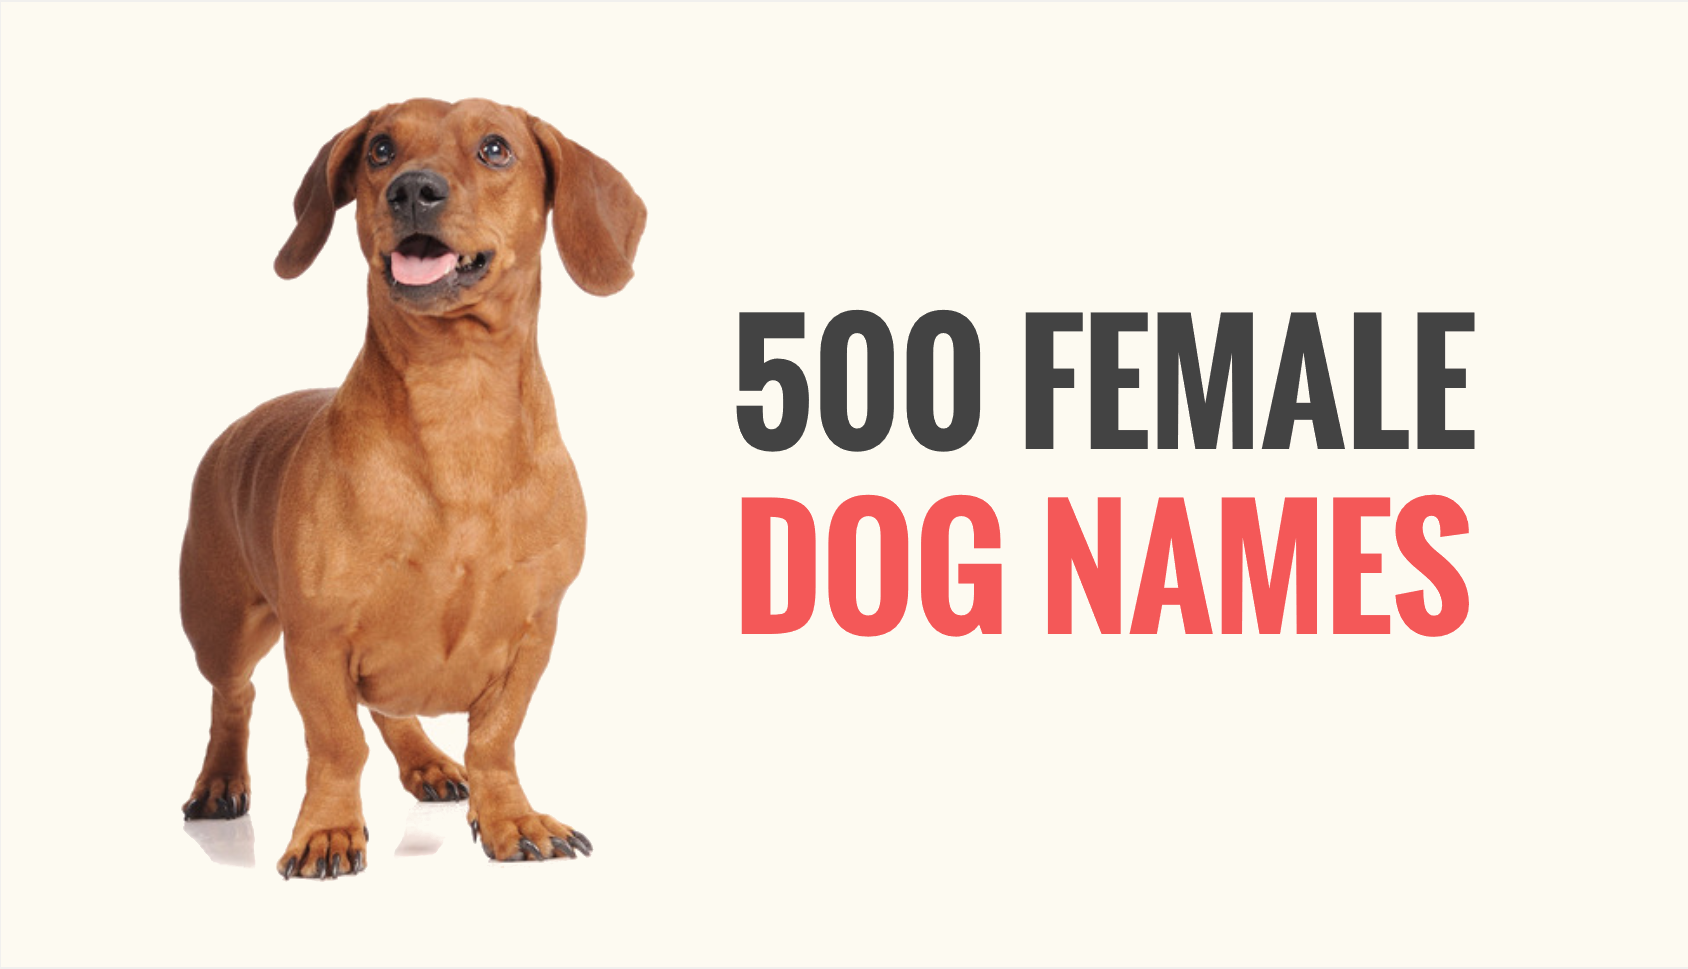 what are some popular names for female dogs